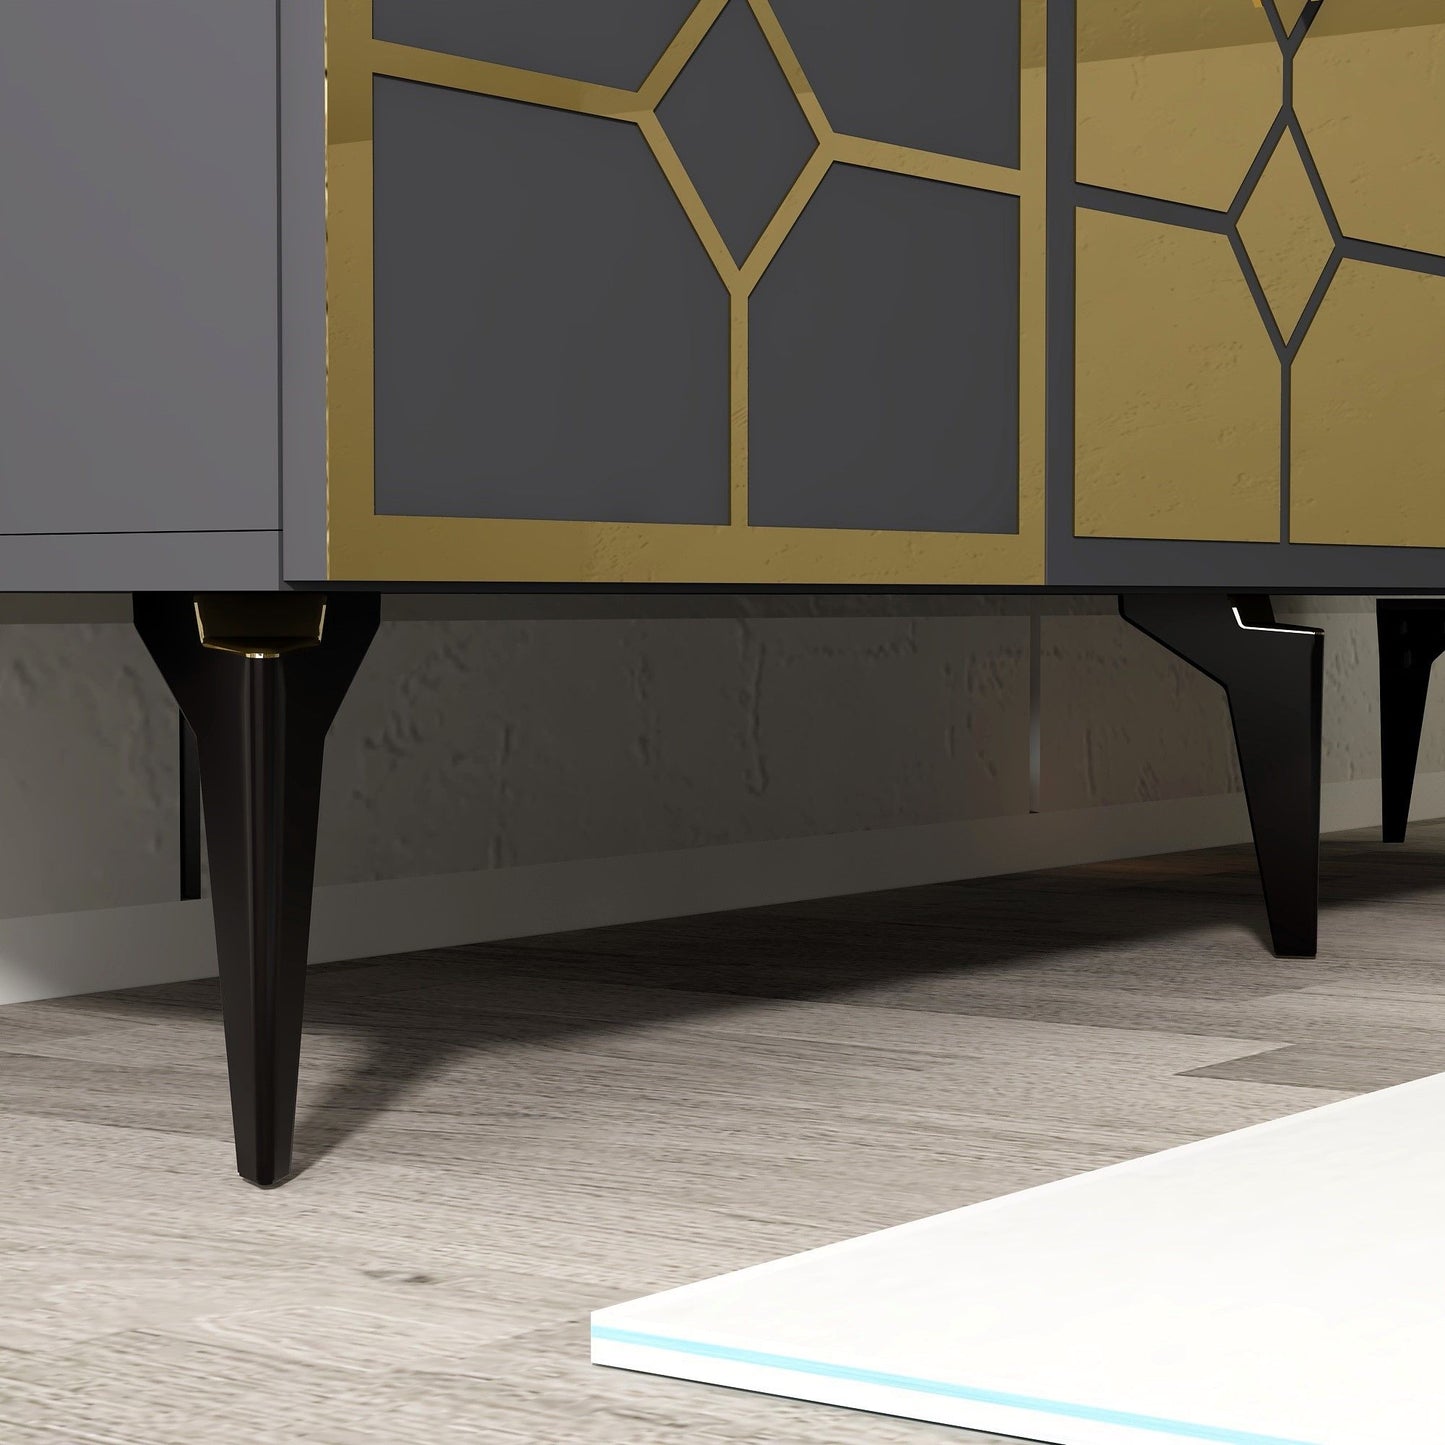 Irmak - Anthracite, Gold - Console